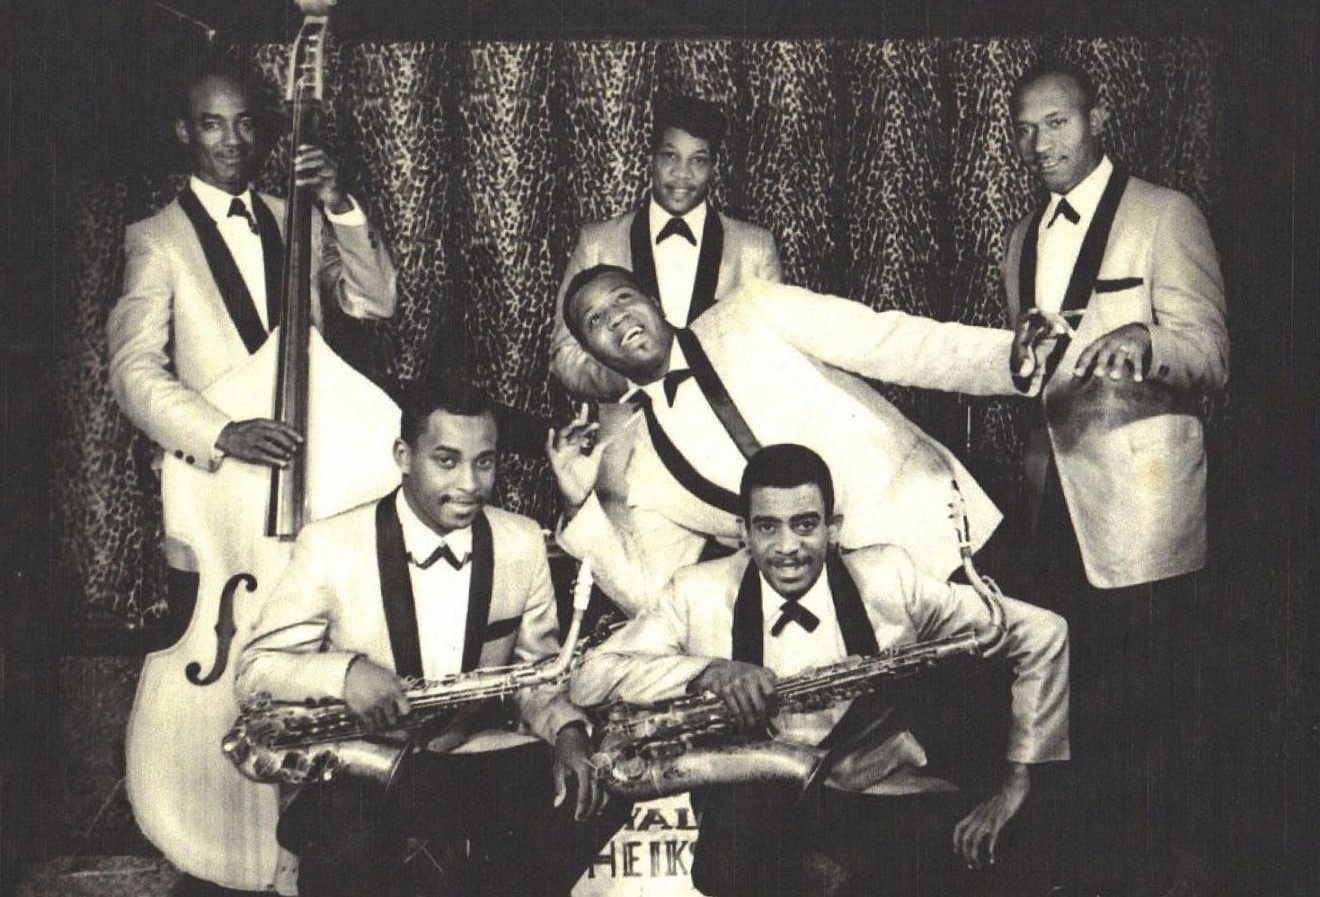 Eddie Hope (middle of the back row) with the Royal Sheiks in 1962.